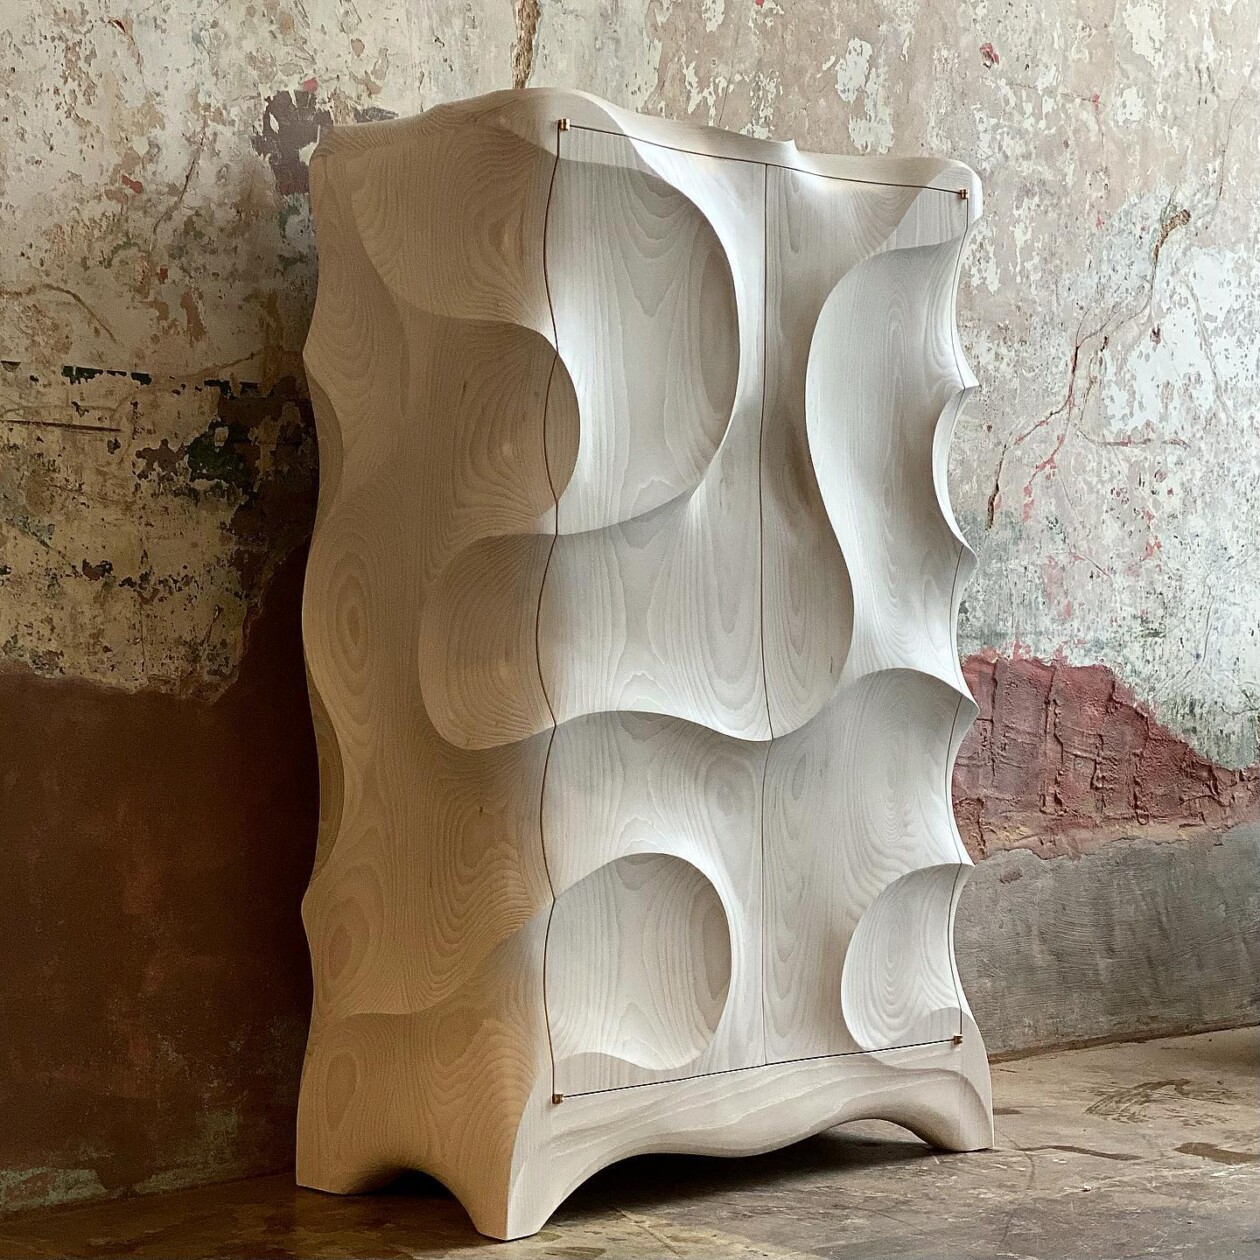 Intricately Engraved And Textured Organic Shaped Furniture By Caleb Woodard (8)